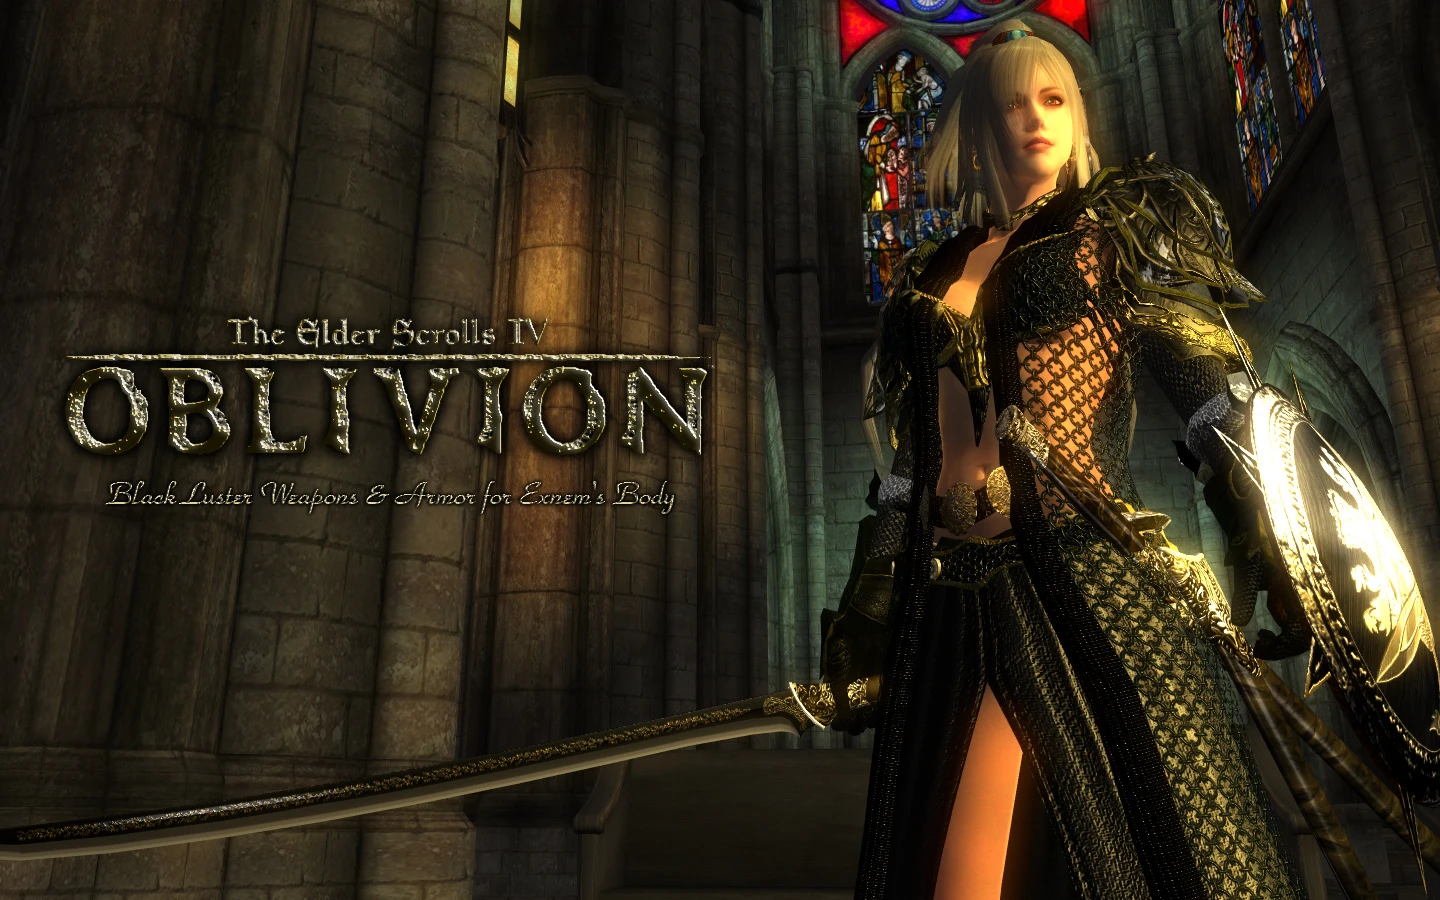 Luster Weapons and Armor for Exnems Body at Oblivion Nexus. www.nexusmods.c...